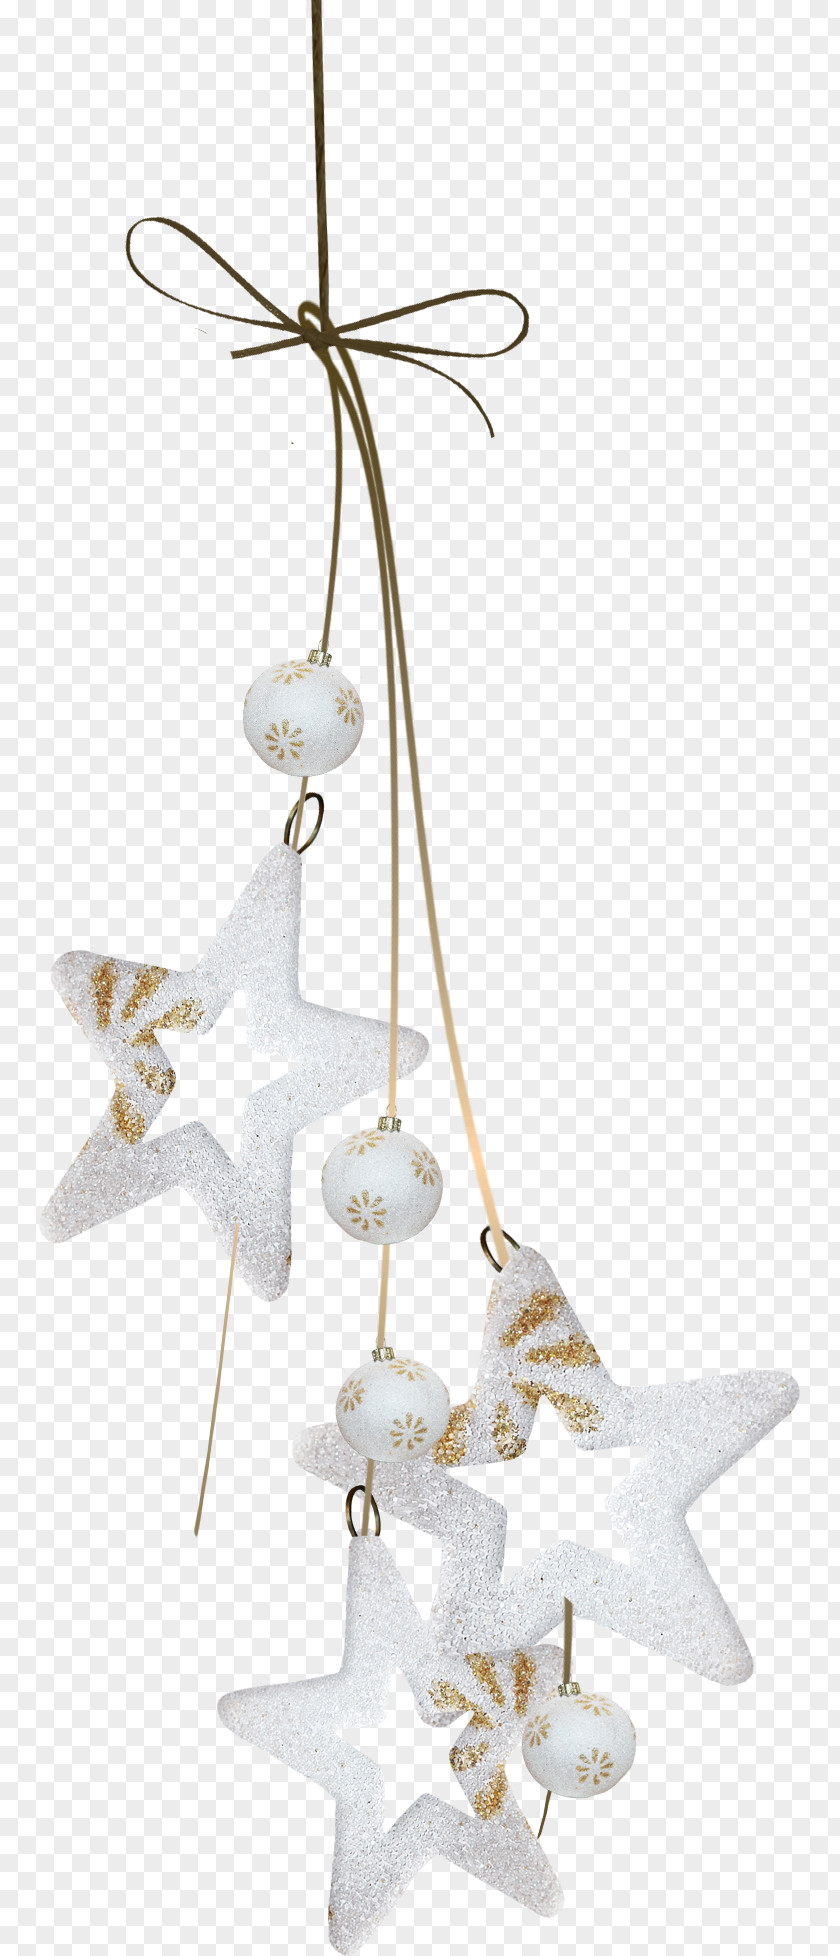 Knotted Rope Christmas Ball Ornament Decoration PNG